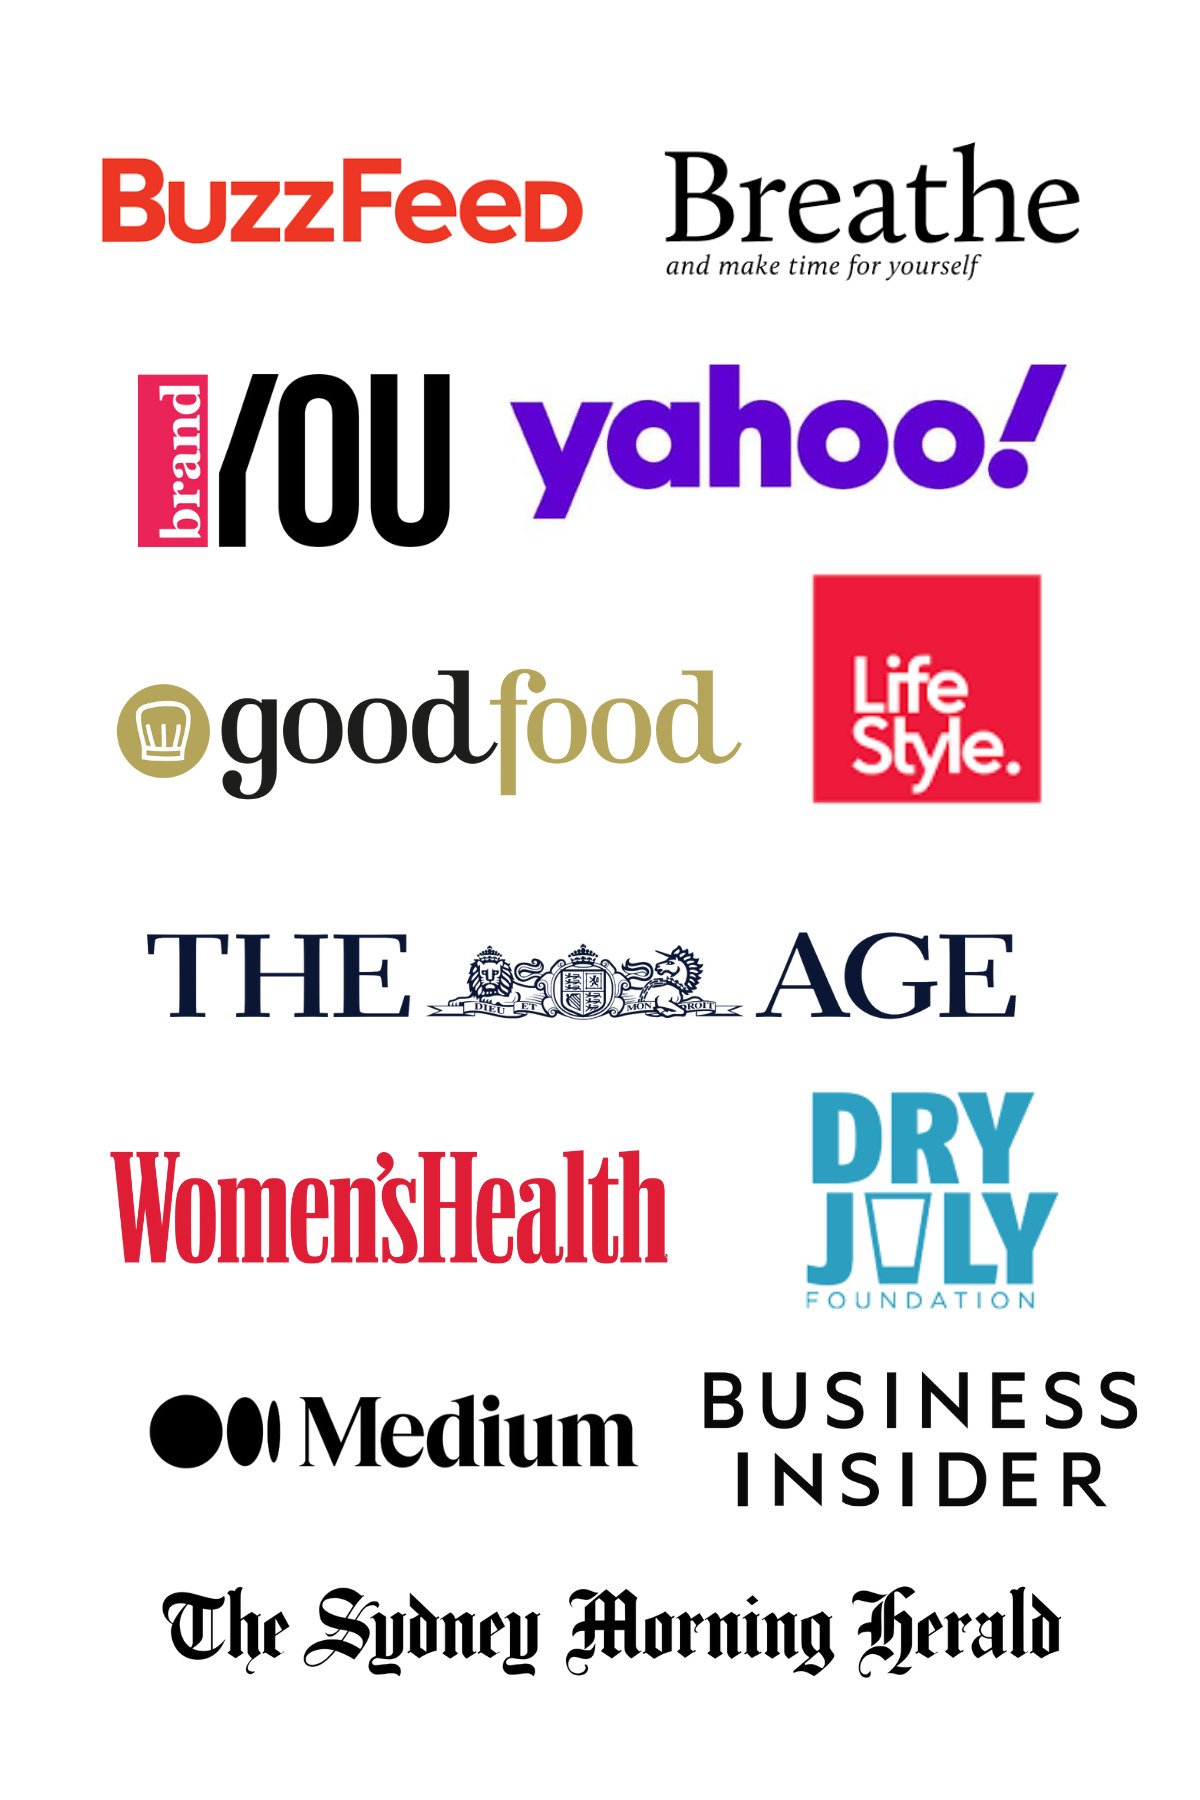 A logo summary of all publications including Yahoo GoodFood BuzzFedd The Age Womens Health Dry July Medium Business Insider